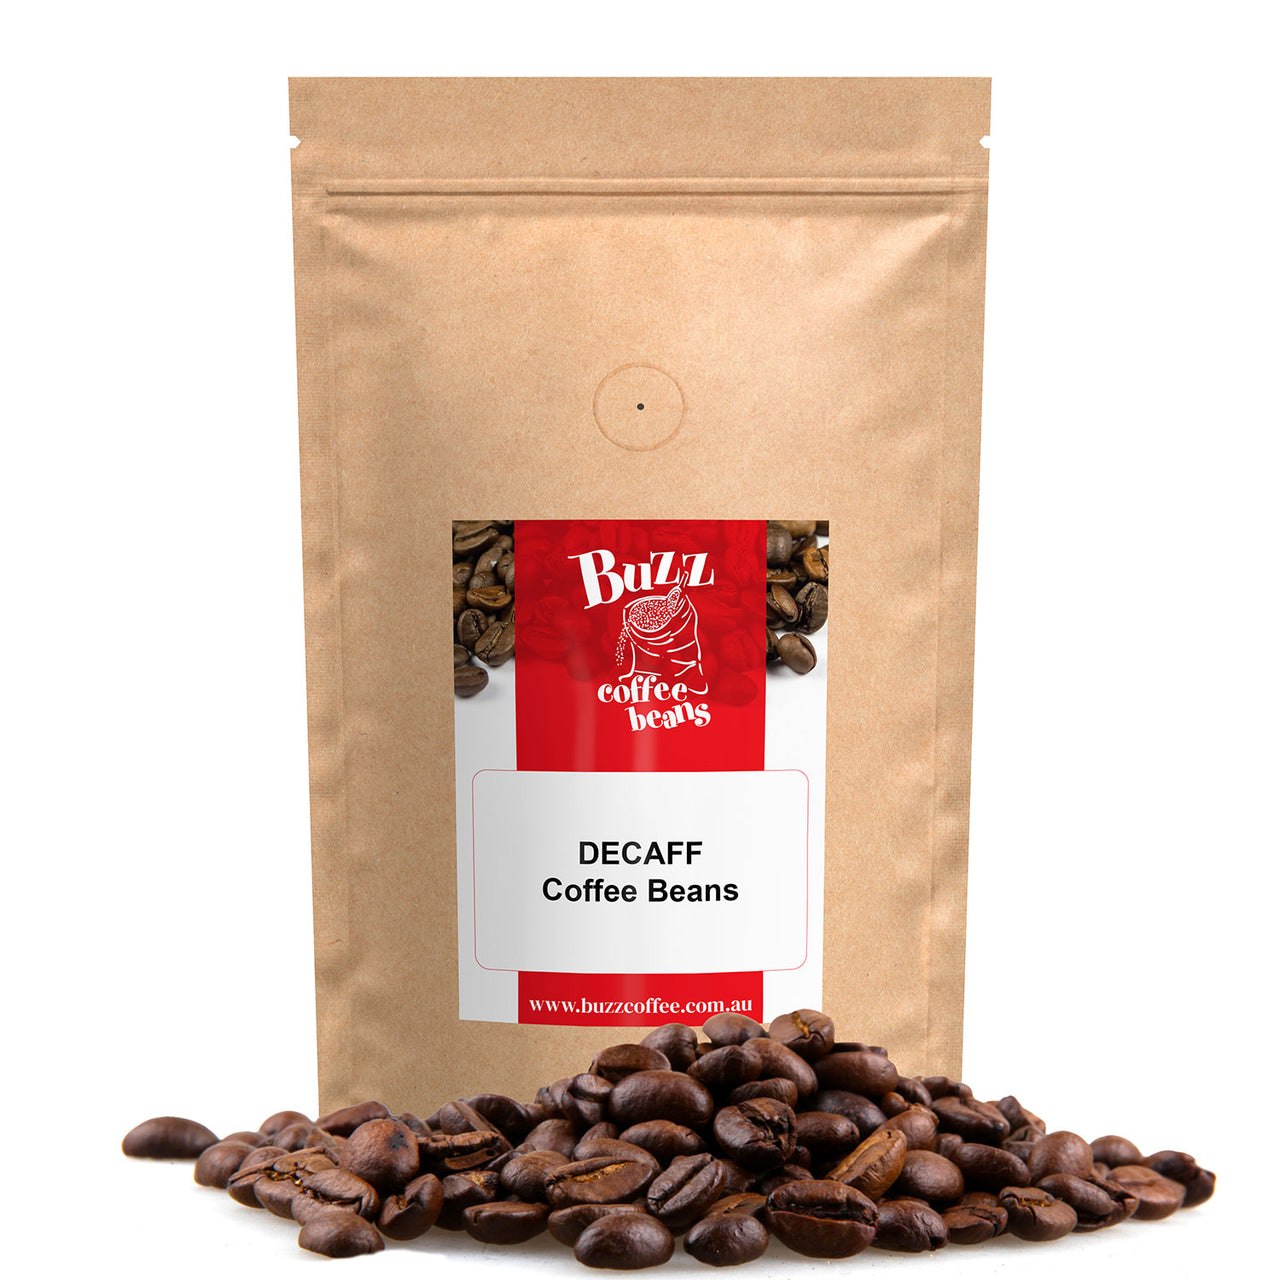 decaff coffee beans